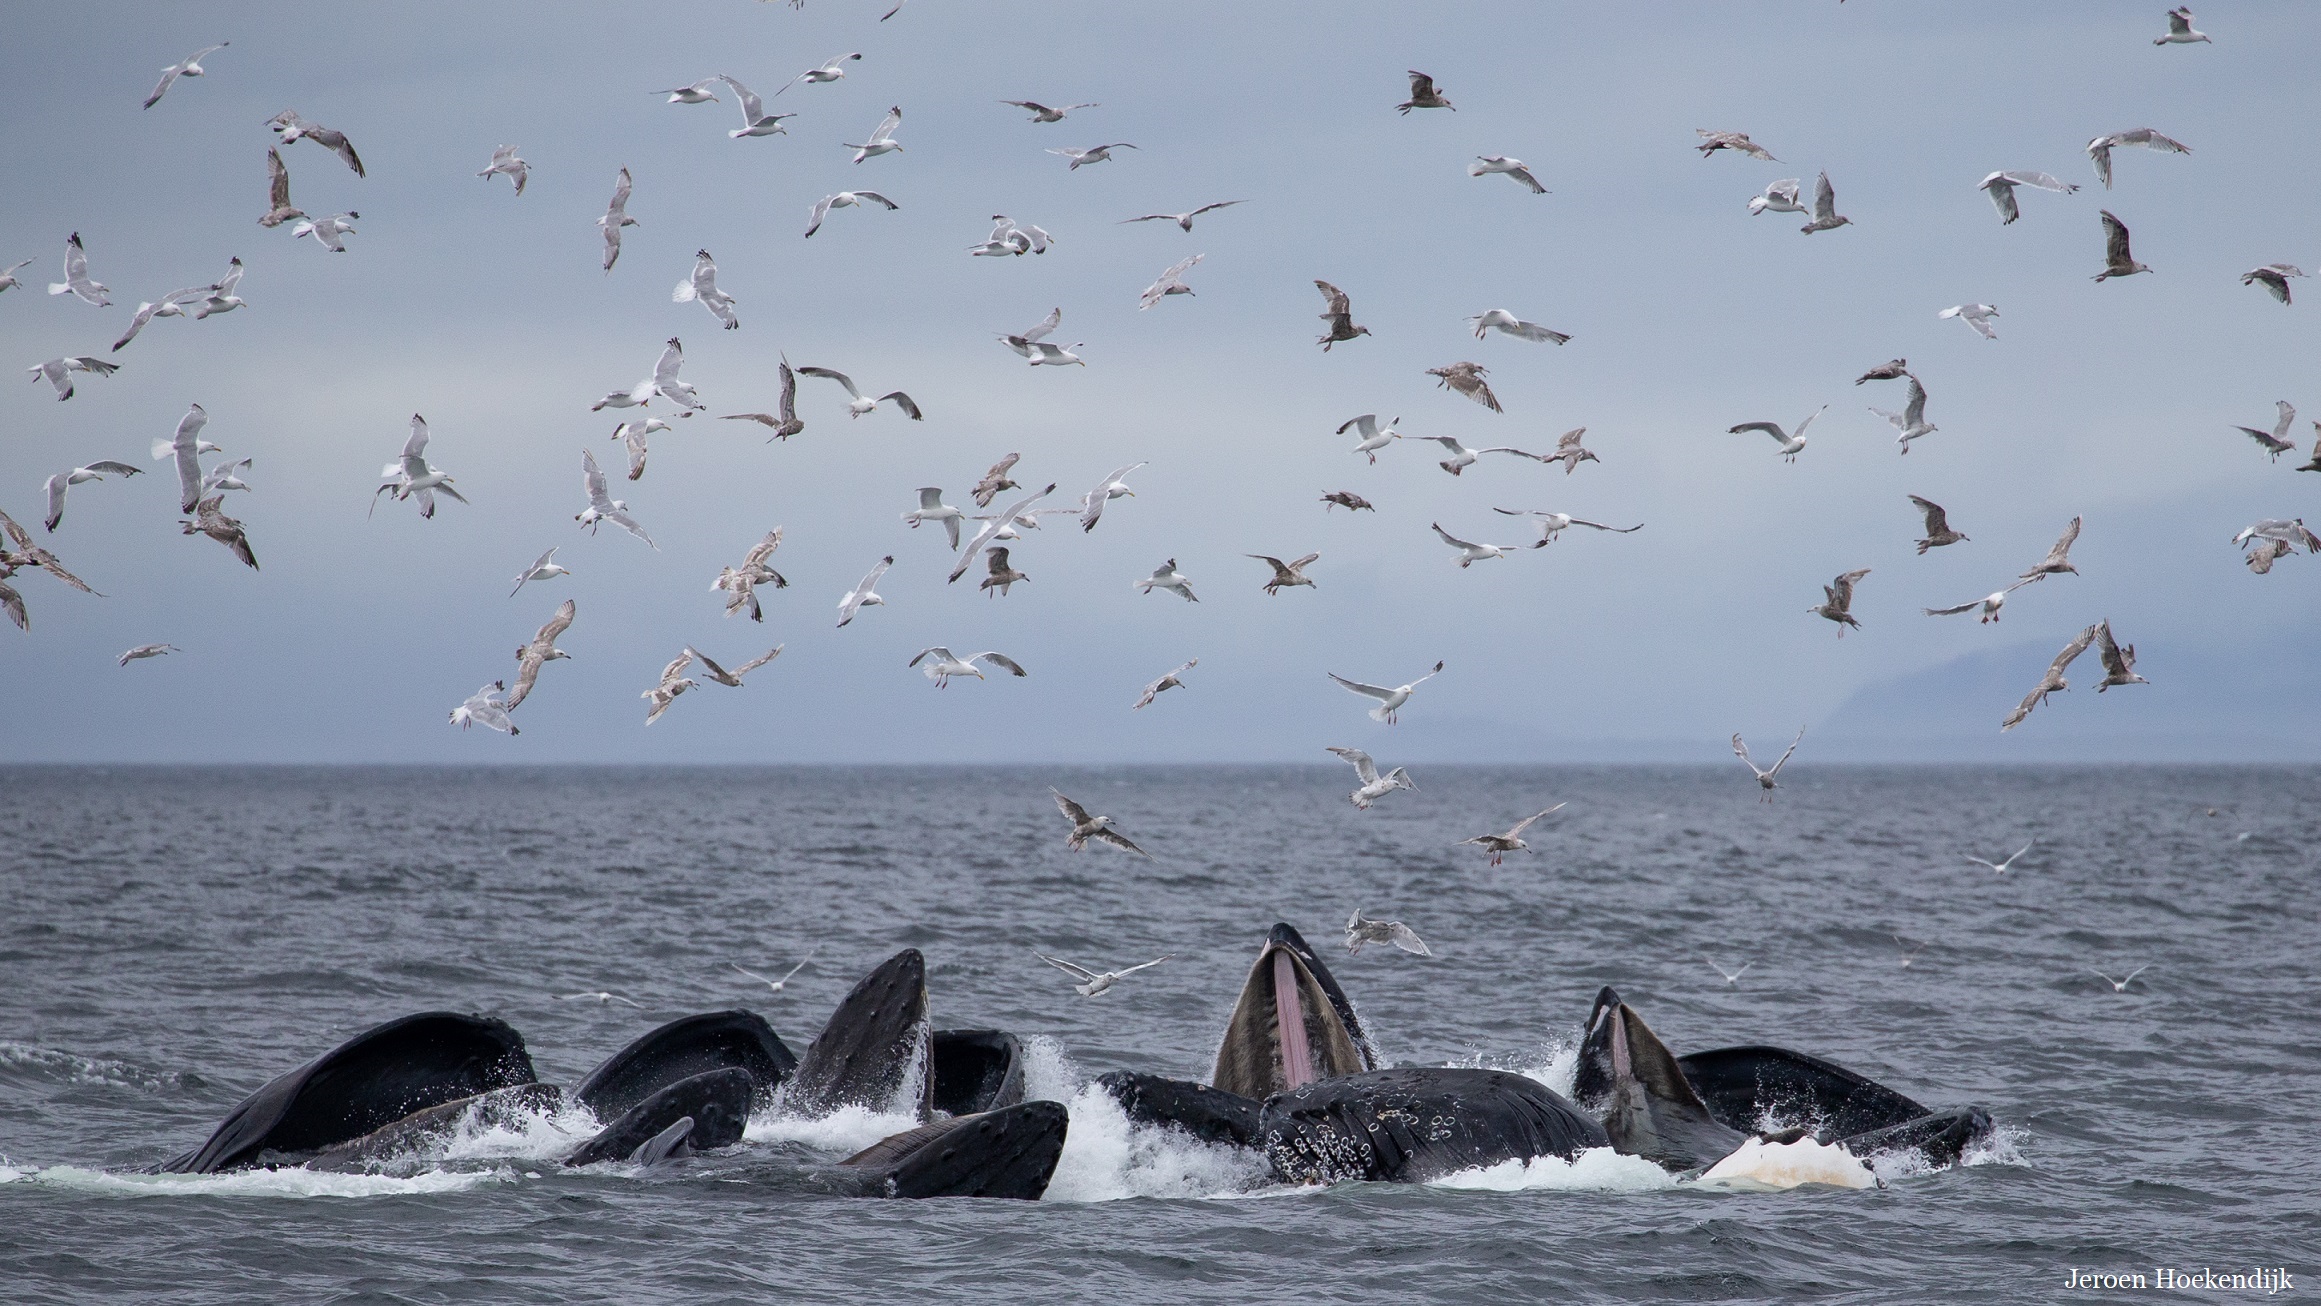 Collective feeding by Humpback whales (Megaptera novaeangliae) in Alaska (USA). The null models for demographic sorting and behavioral selection assume that habitat quality declines linearly with the increase in species-density. For most social, cooperative organisms this linear relationship does not hold; fitness may increase as function of group size (the Allee effect), which results in a non-linear relationship between fitness and population densities. Photo: Jeroen Hoekendijk.